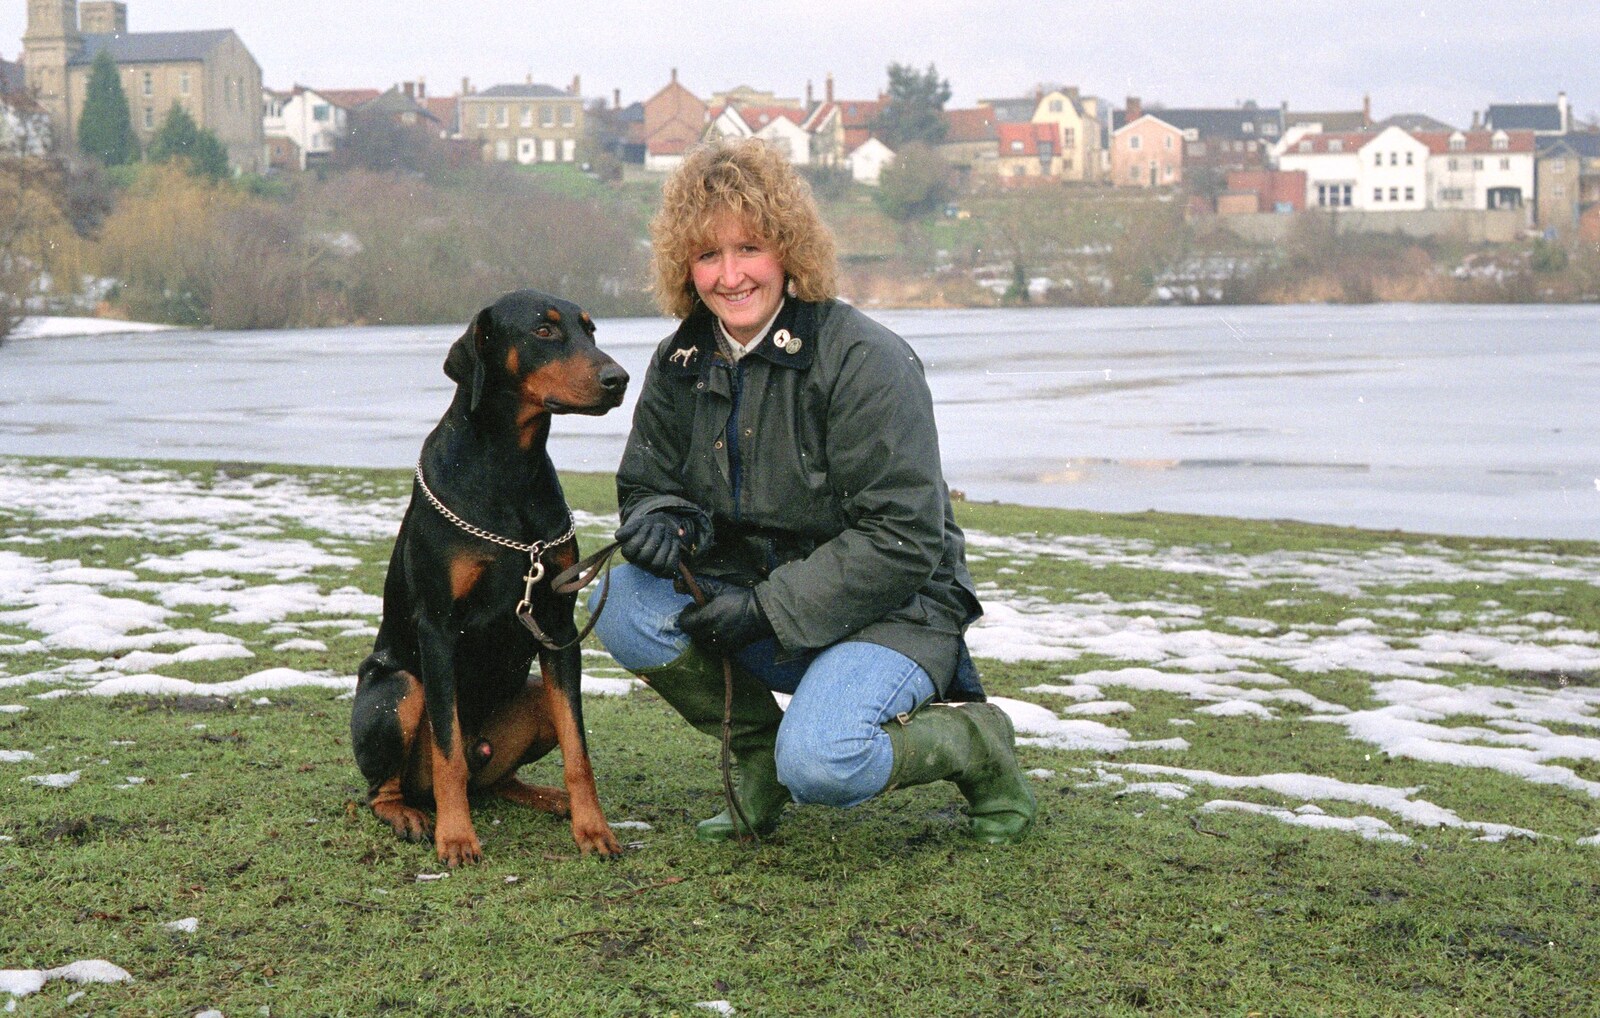 Tina and Doberman by a frozen Mere in Diss from The Newmarket Dog Show and Dobermans on the Ling, Newmarket and Wortham, Suffolk - 3rd April 1991